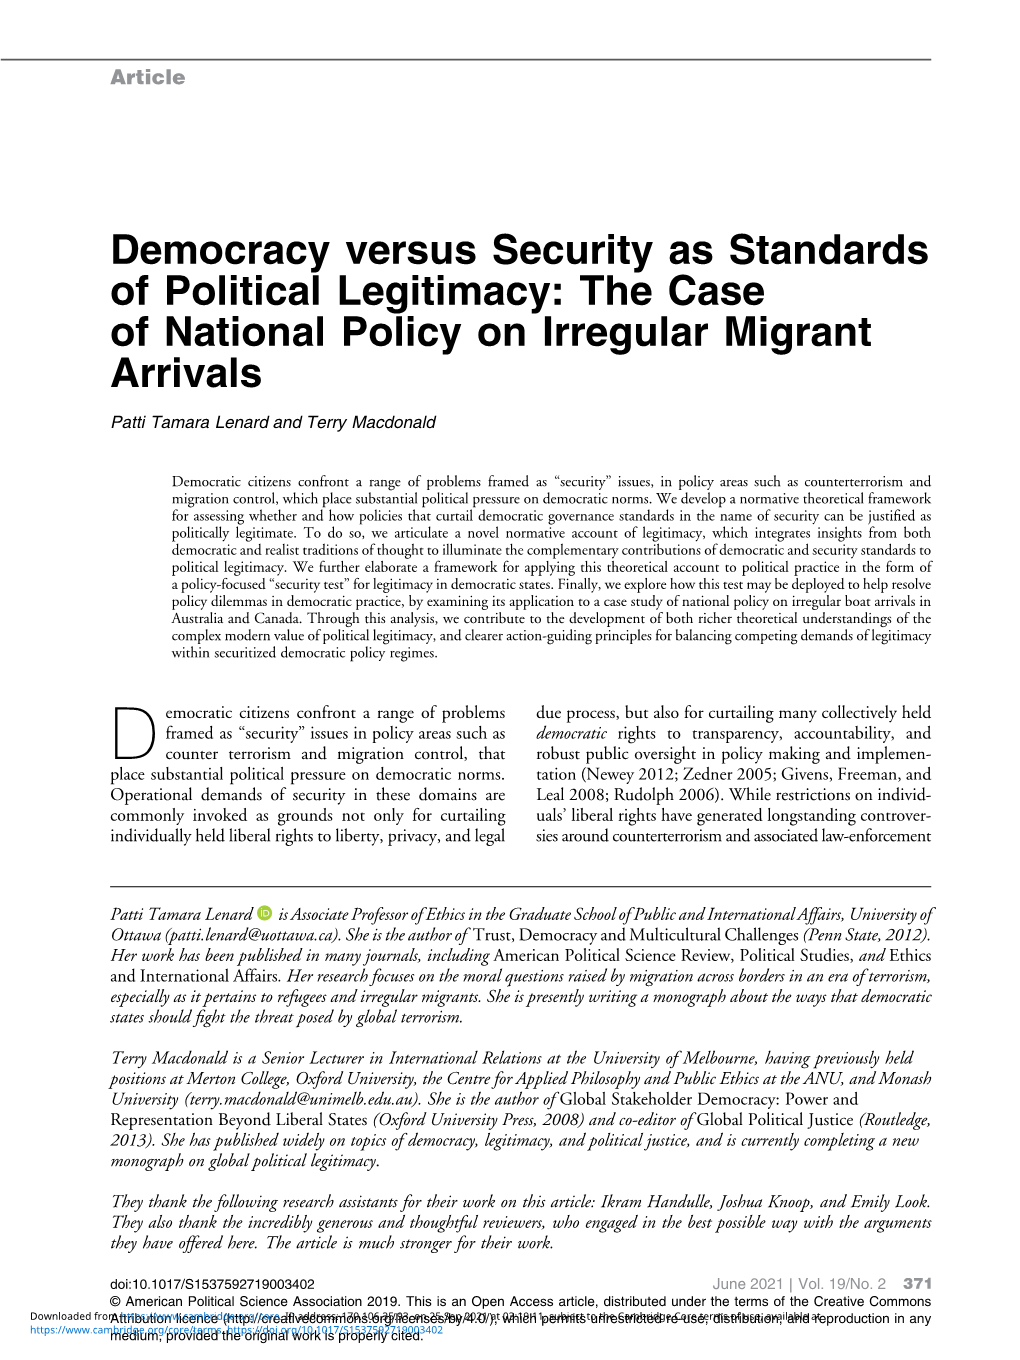 Democracy Versus Security As Standards of Political Legitimacy: the Case of National Policy on Irregular Migrant Arrivals